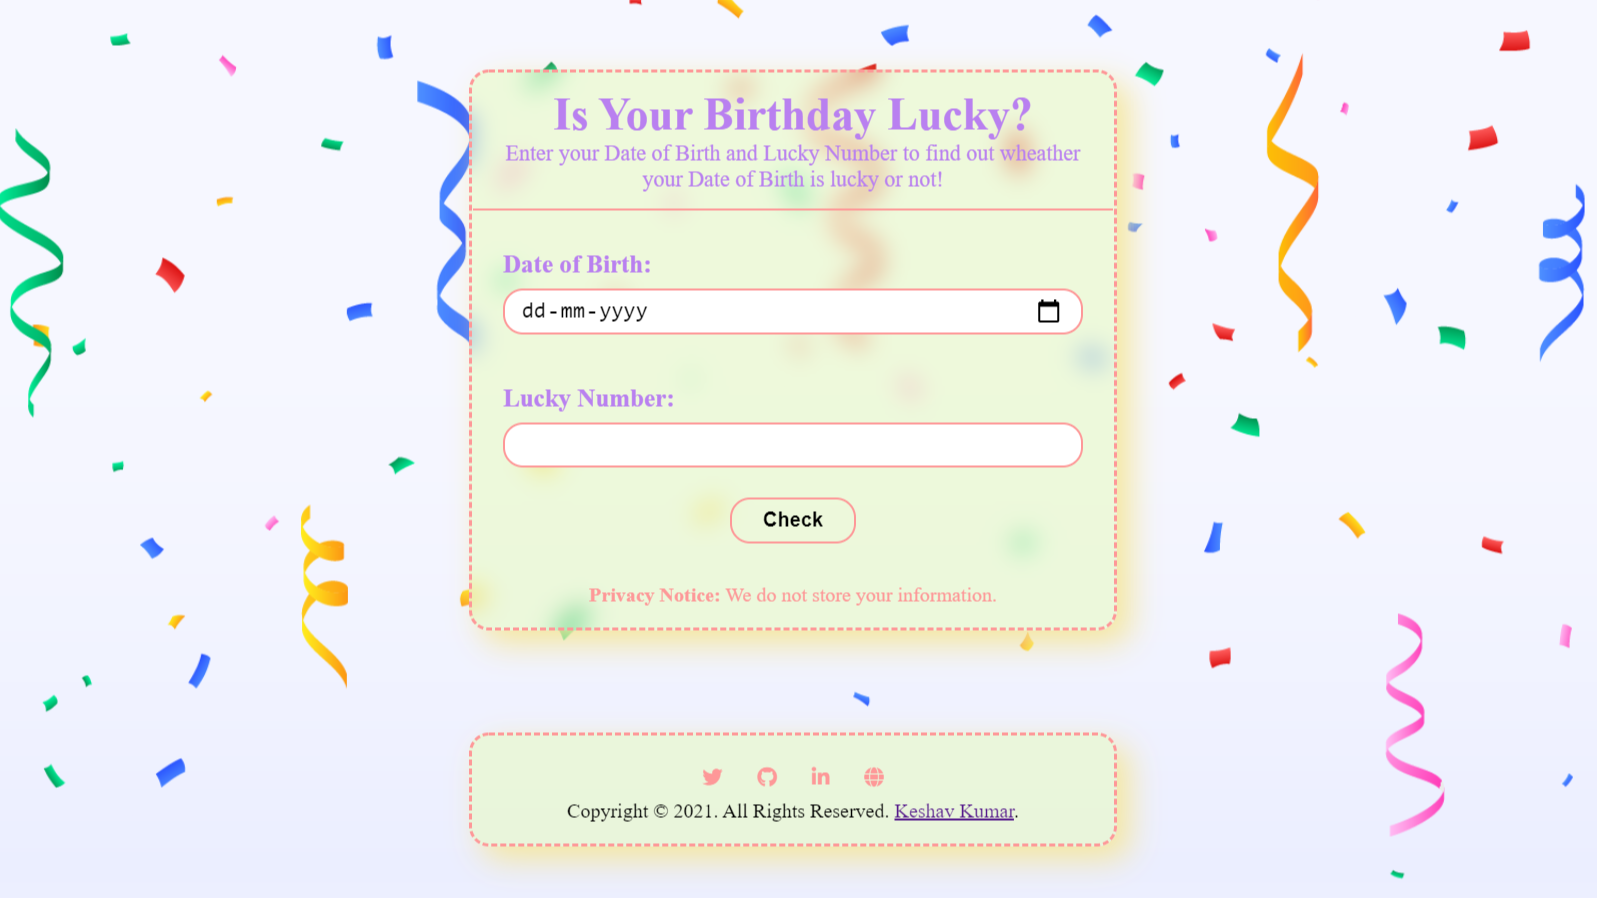 Is Your Birthday Lucky?